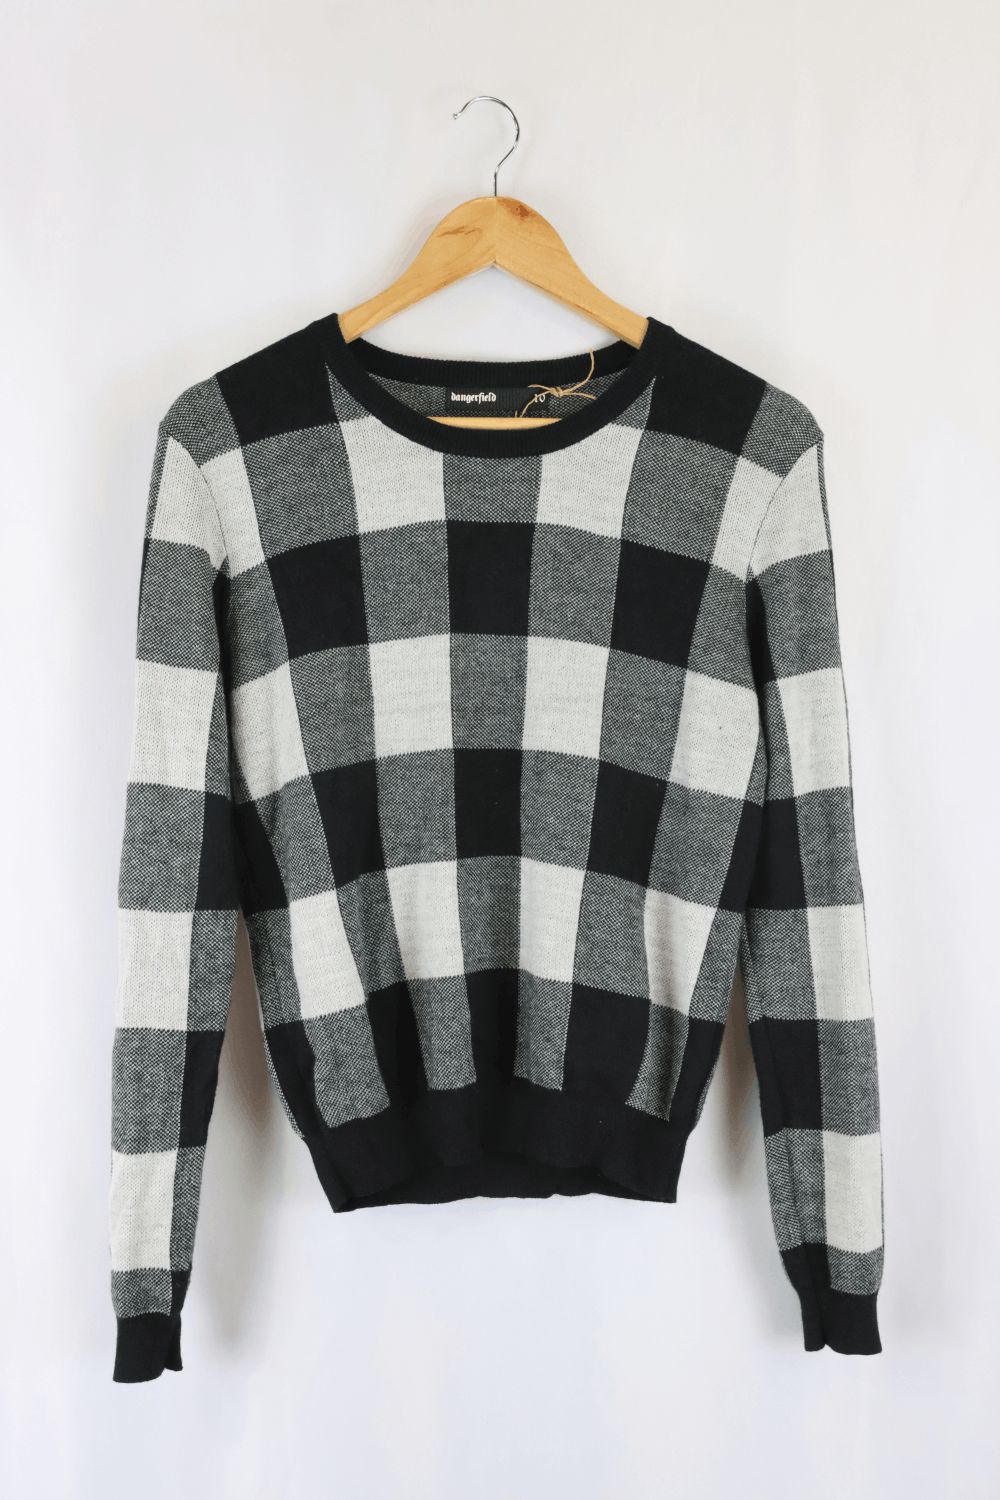 Dangerfield Black And White Knit 10